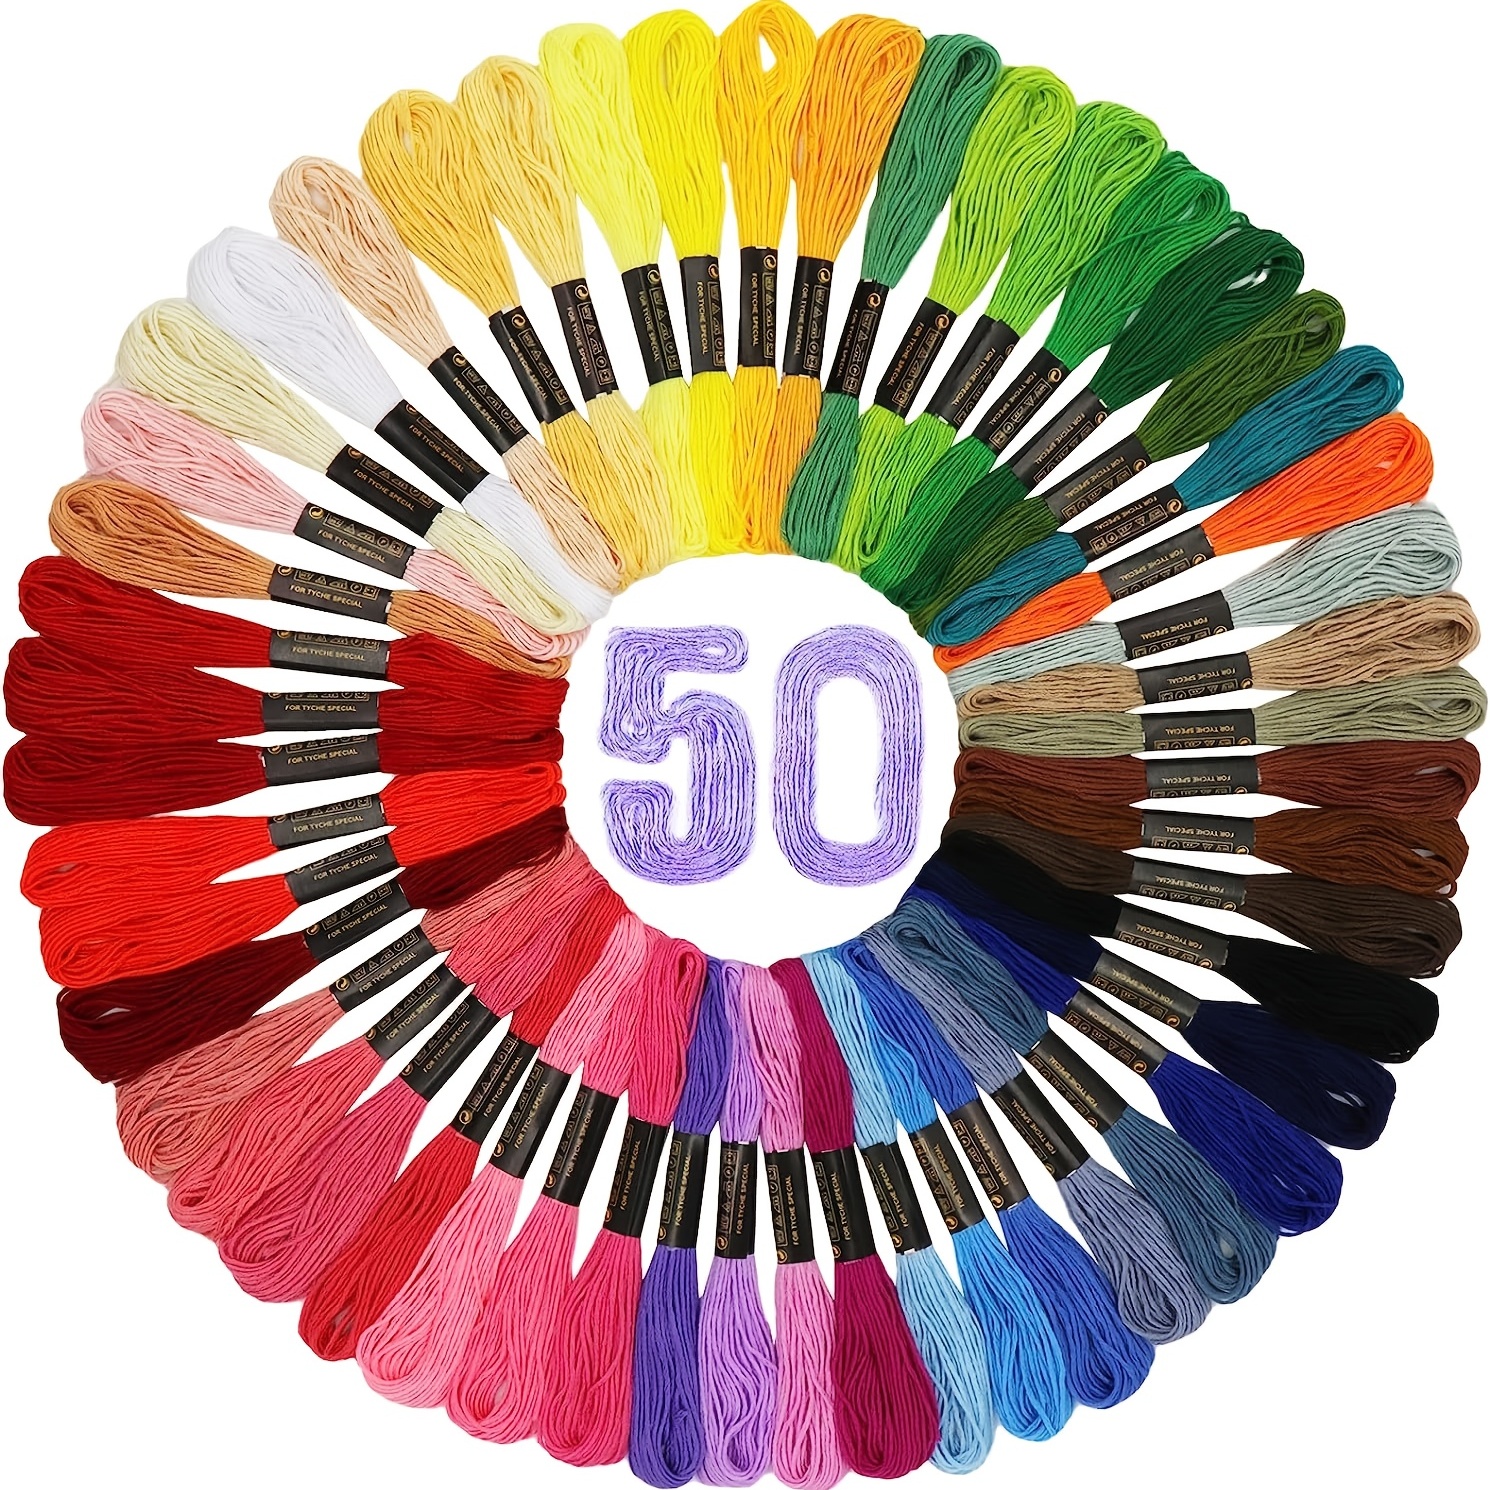 

50pcs Friendship Bracelet String 50 Skeins Rainbow Color Embroidery Floss Cross Stitch Embroidery Thread Cotton Friendship Bracelet Thread Floss Bracelet Yarn, Craft Floss